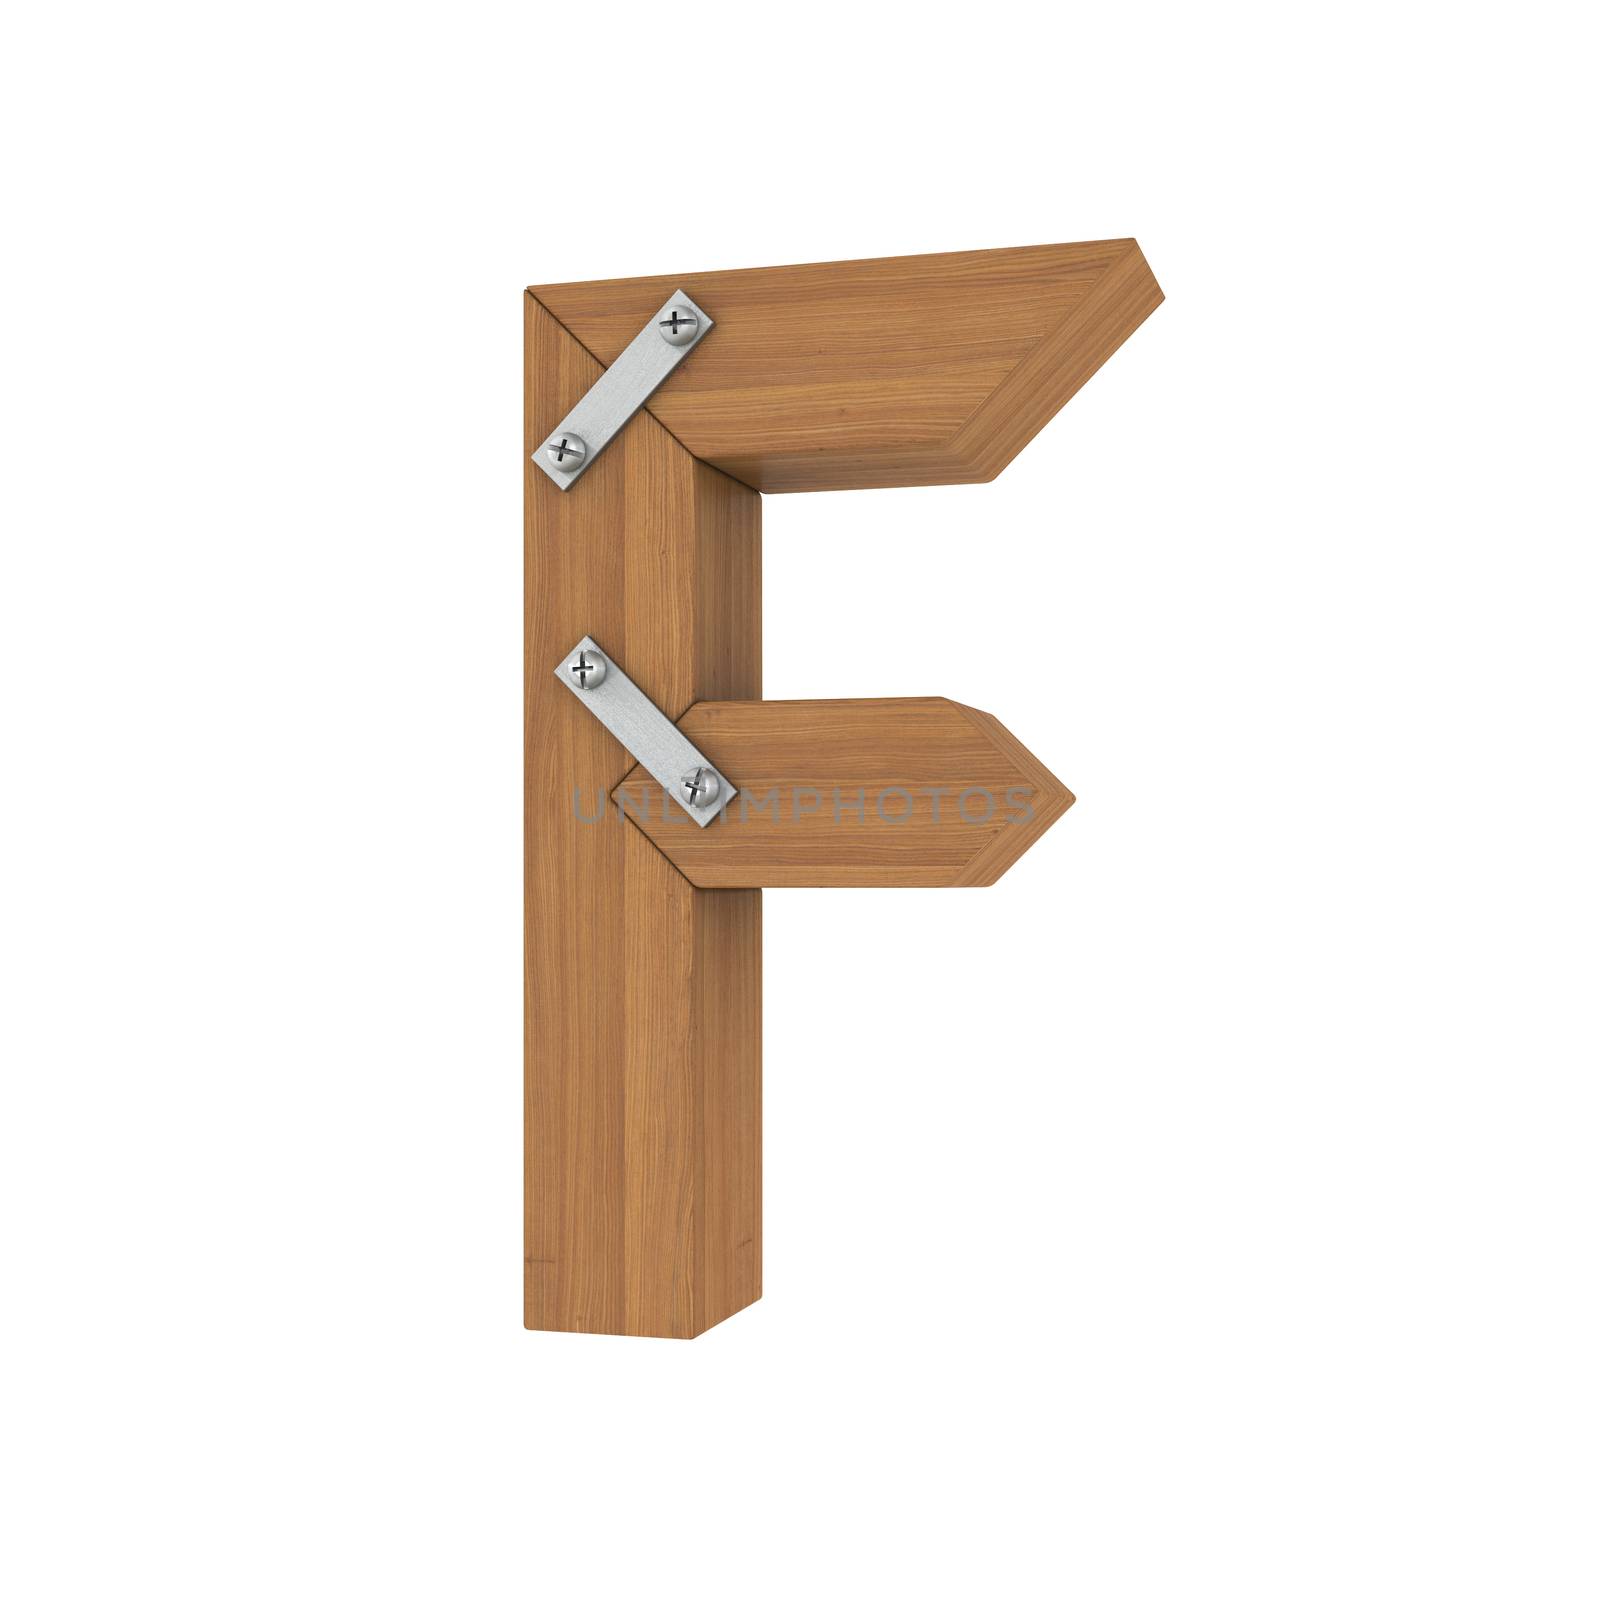 Wooden letter F. Isolated render on a white background